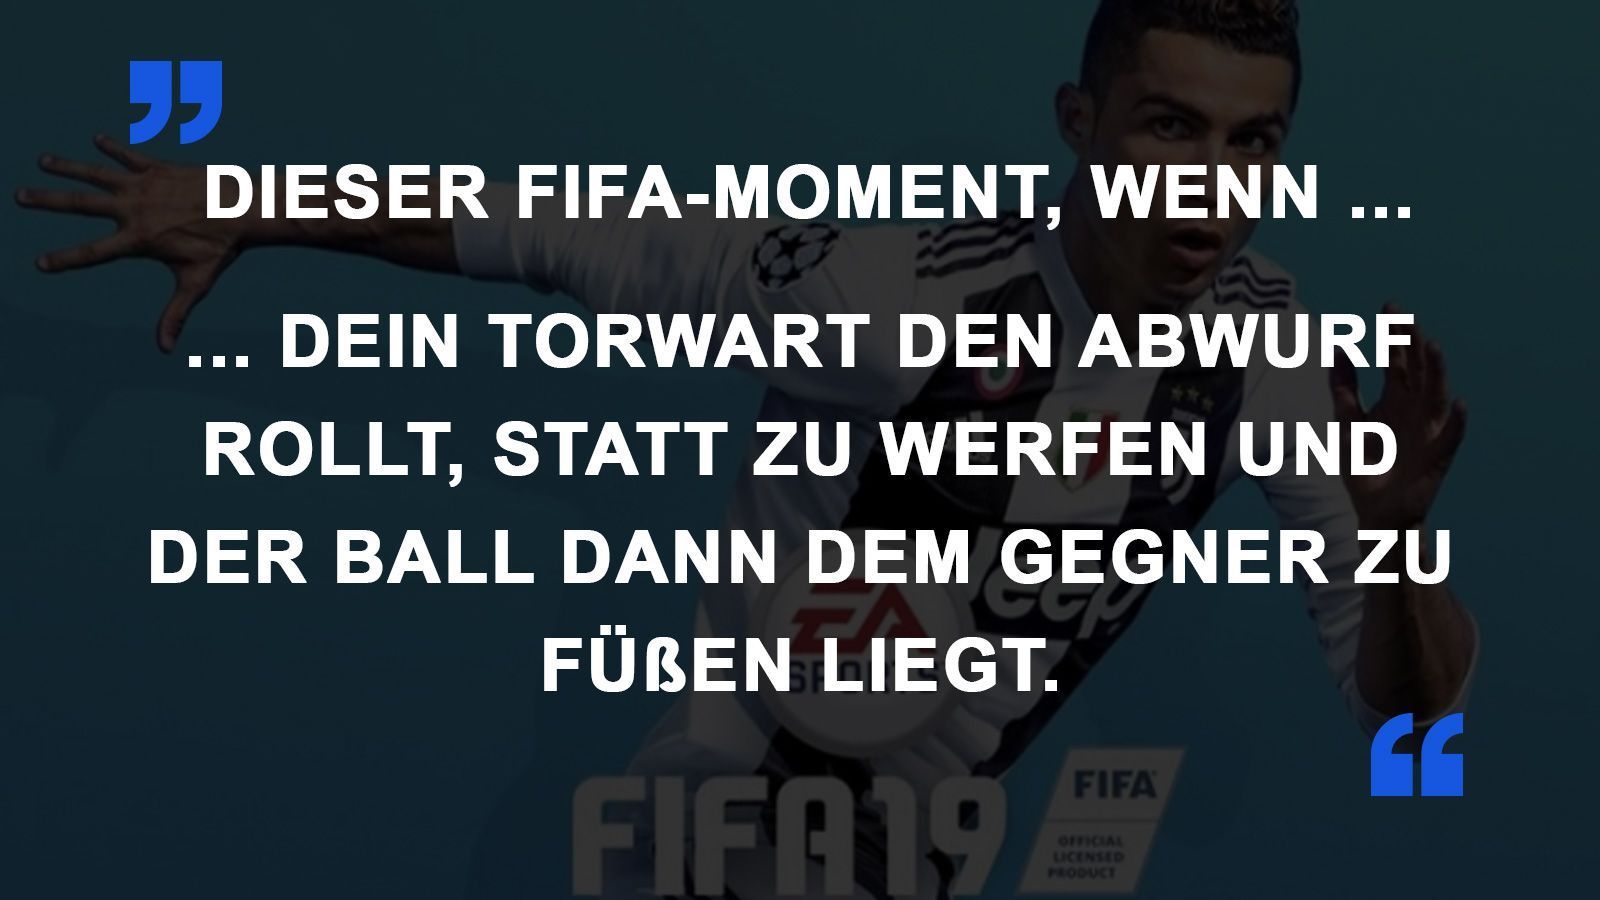 
                <strong>FIFA Momente Abwurf</strong><br>
                
              